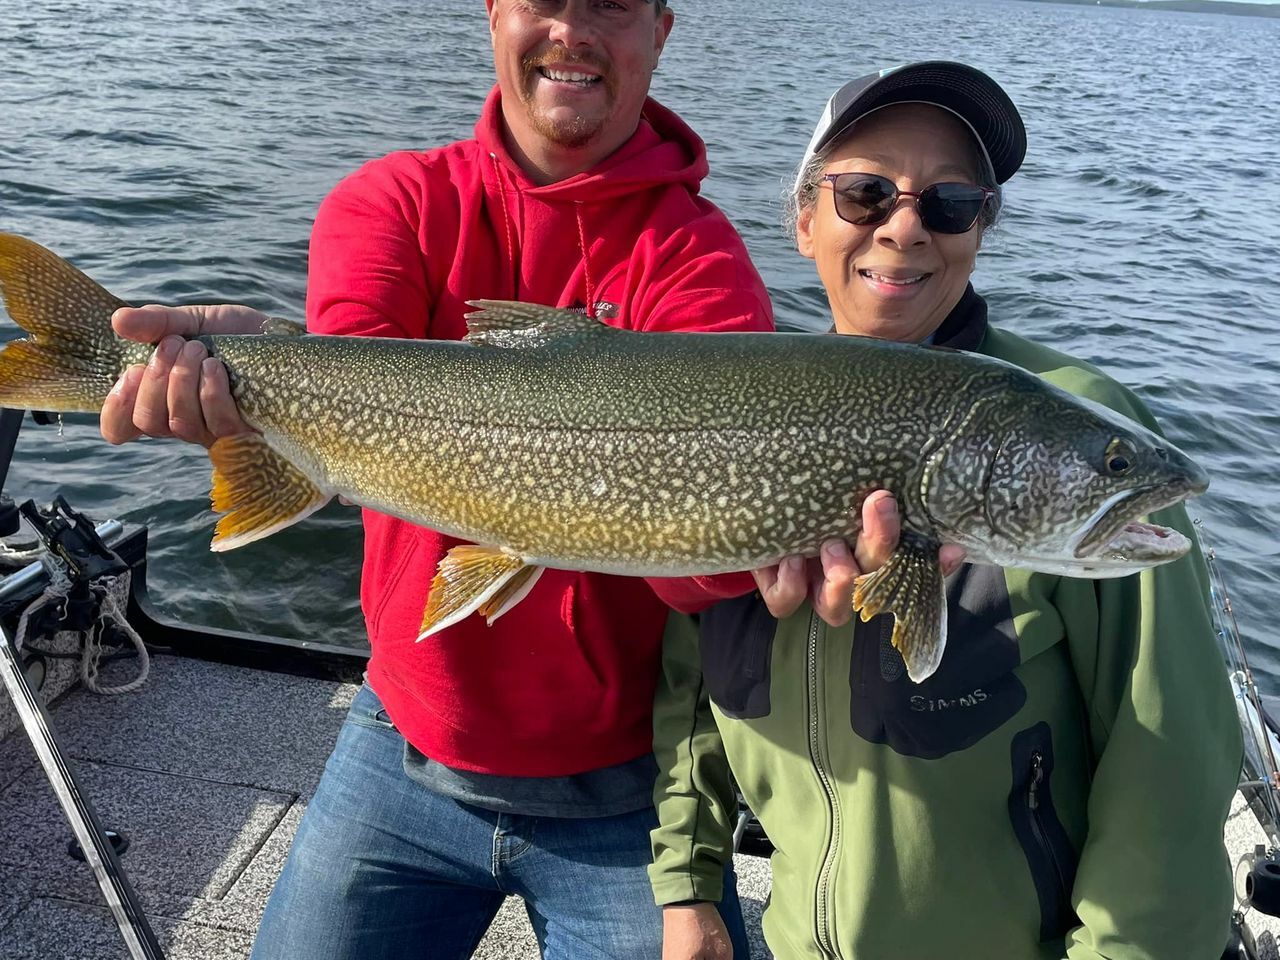 Lake Louise - Any day you hook 15 lake trout is a good day! - June